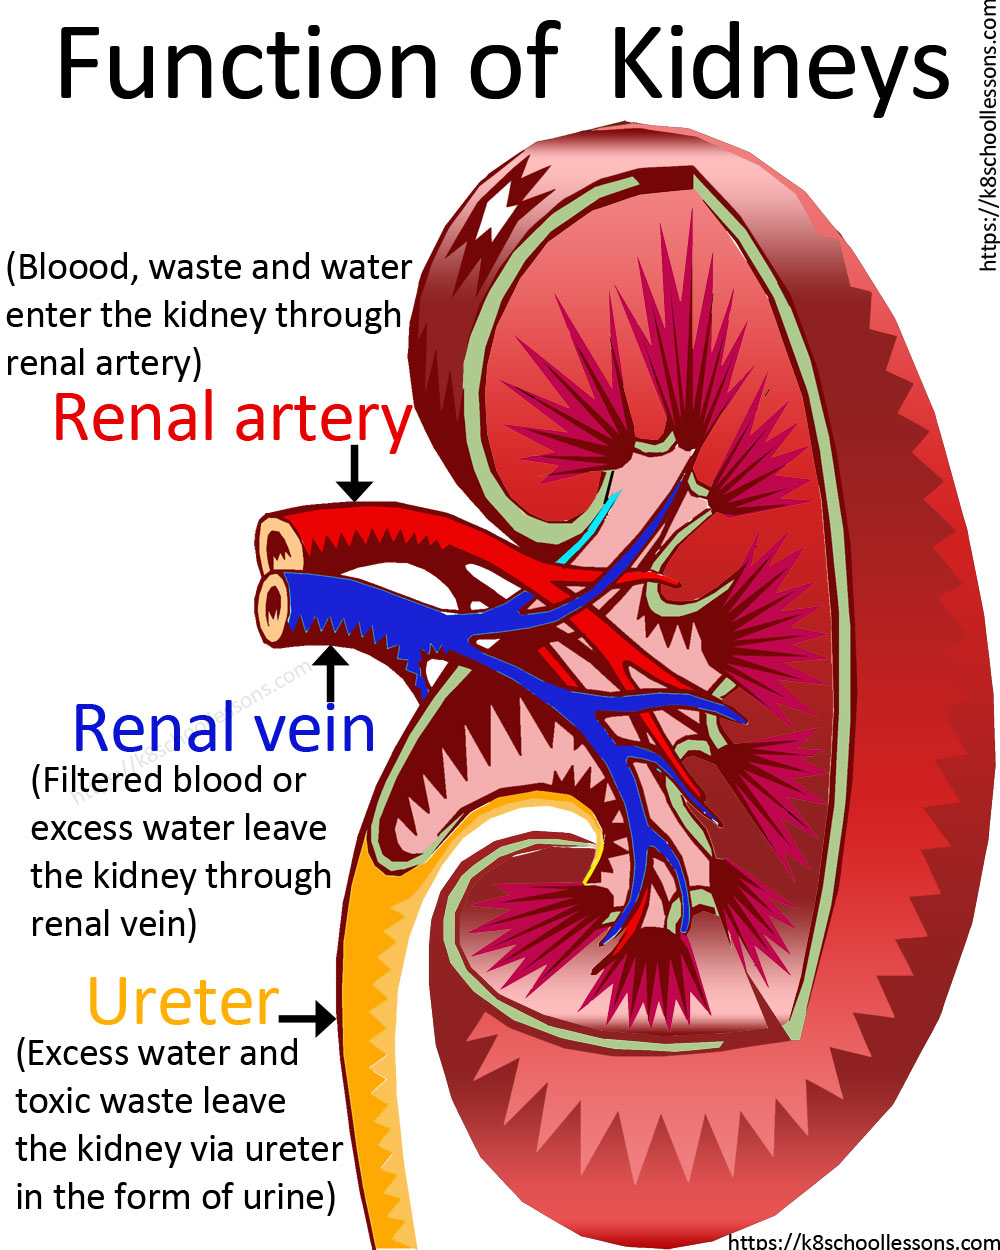 Urinary system for kids - Function of Kidneys